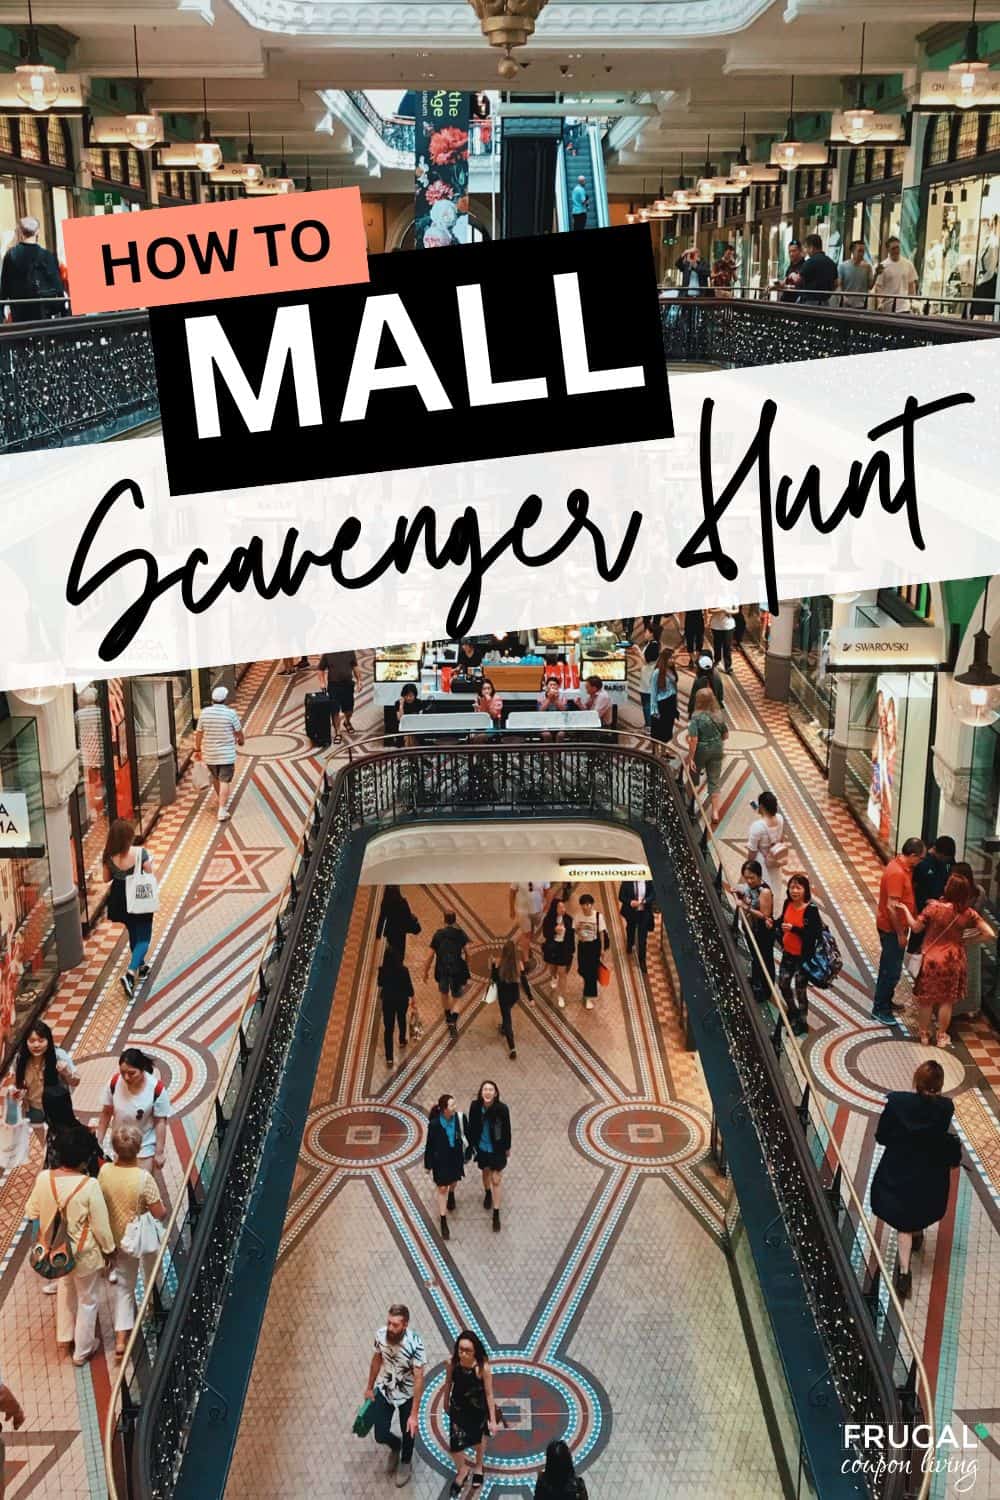 how to have a mall scavenger hunt